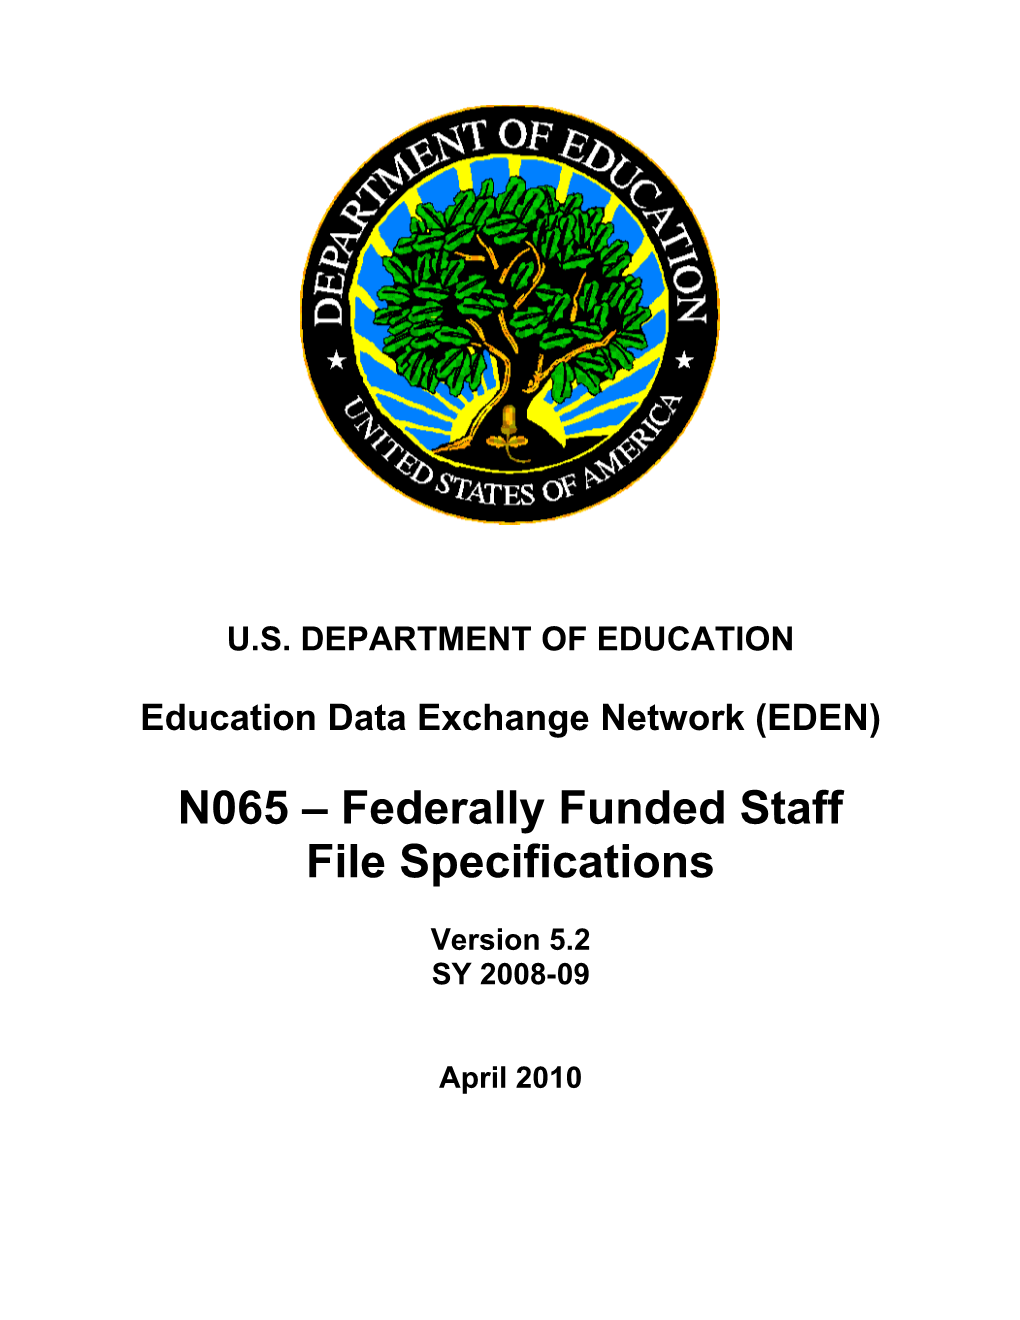 N065-Federally Funded Staff File Specifications (MS Word)